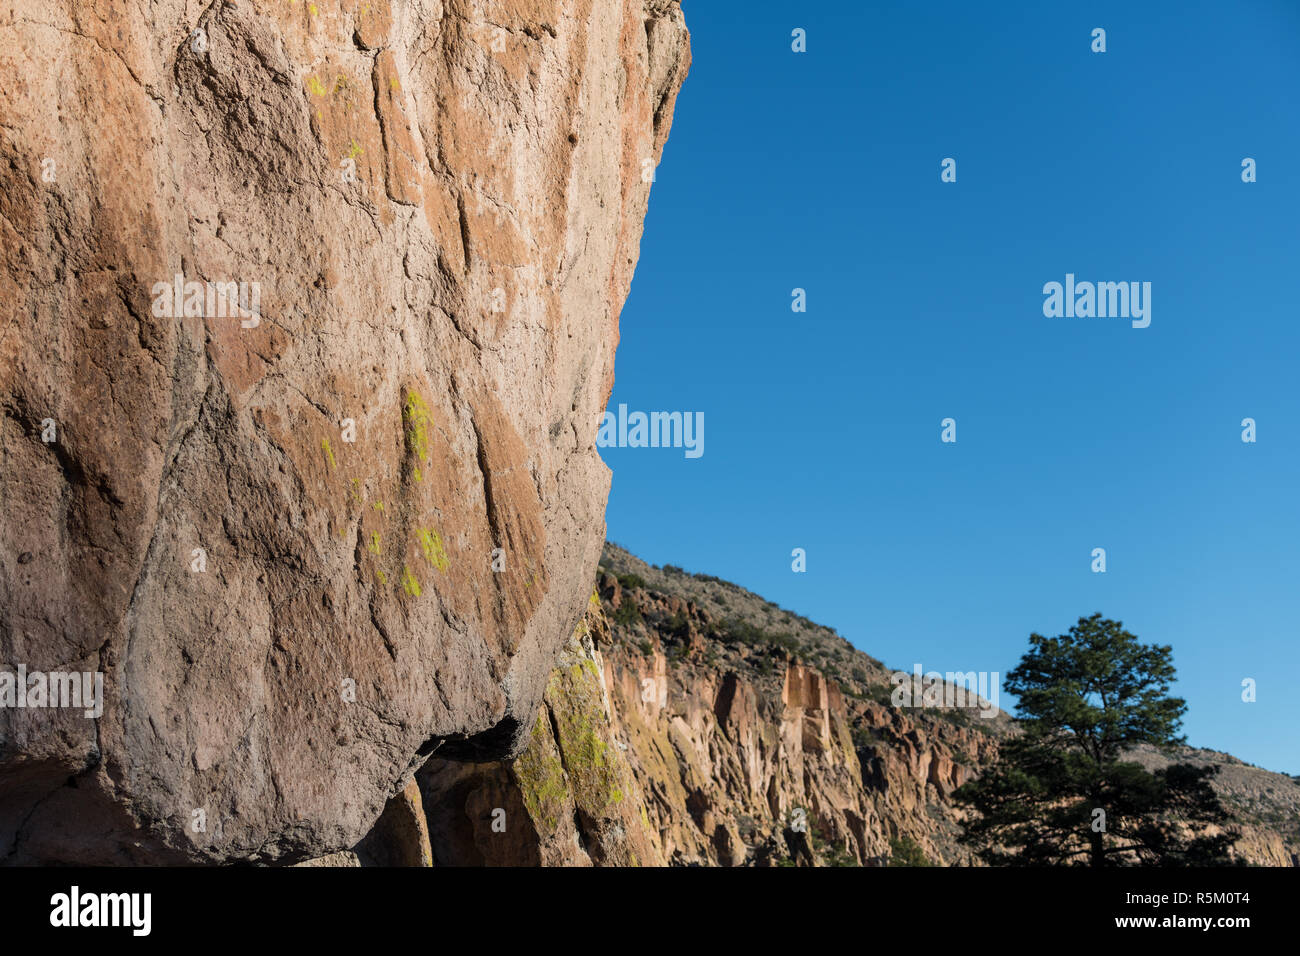 Overhanging colorful cliff of sandstone with yellow-green lichen in Bandelier National Monument Stock Photo